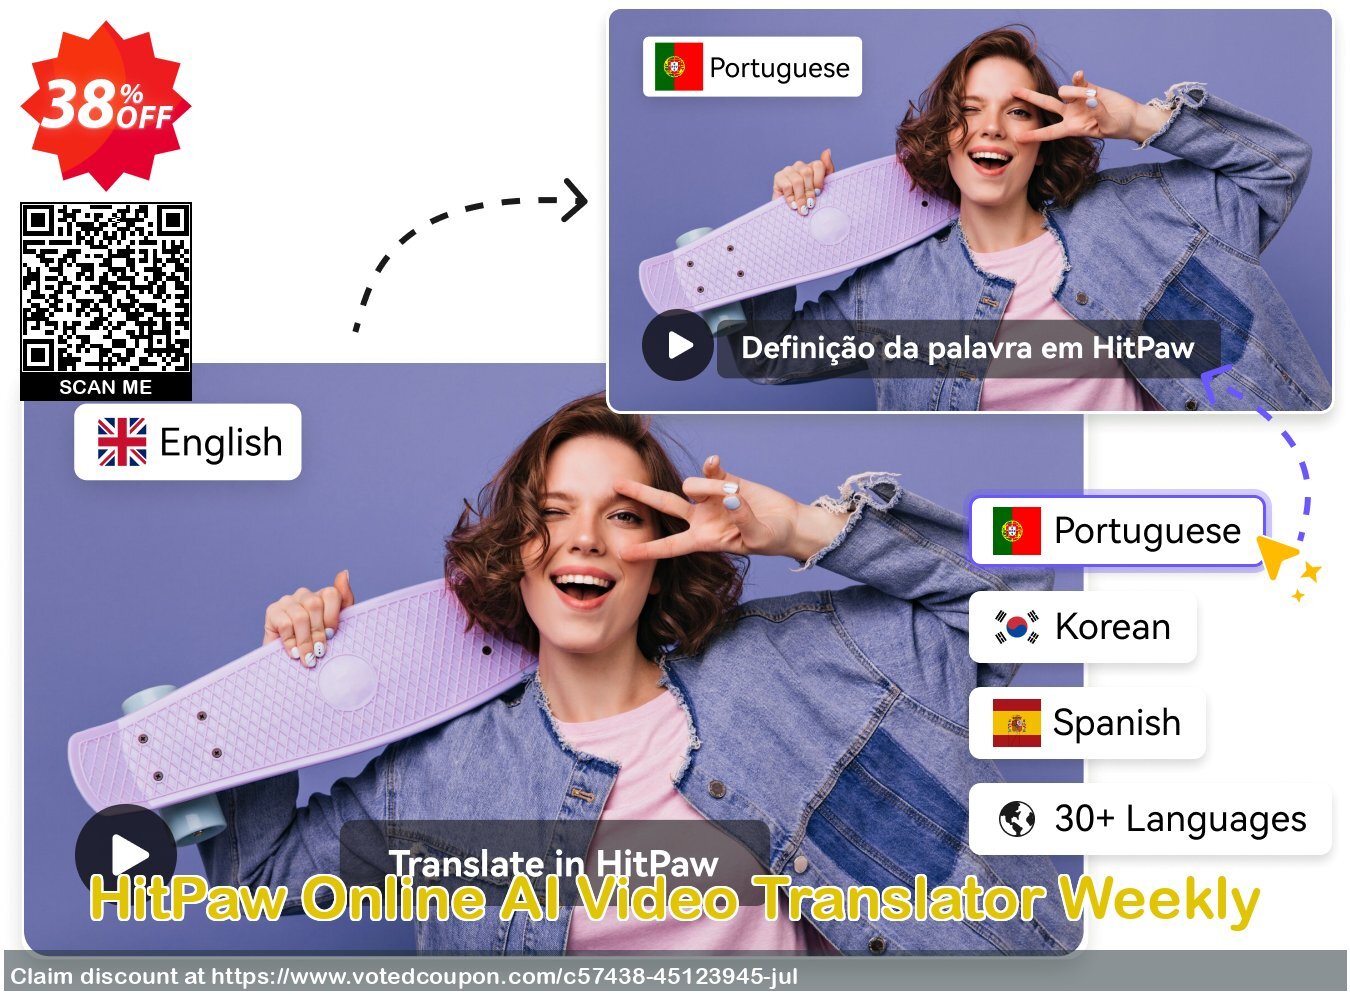 HitPaw Online AI Video Translator Weekly voted-on promotion codes